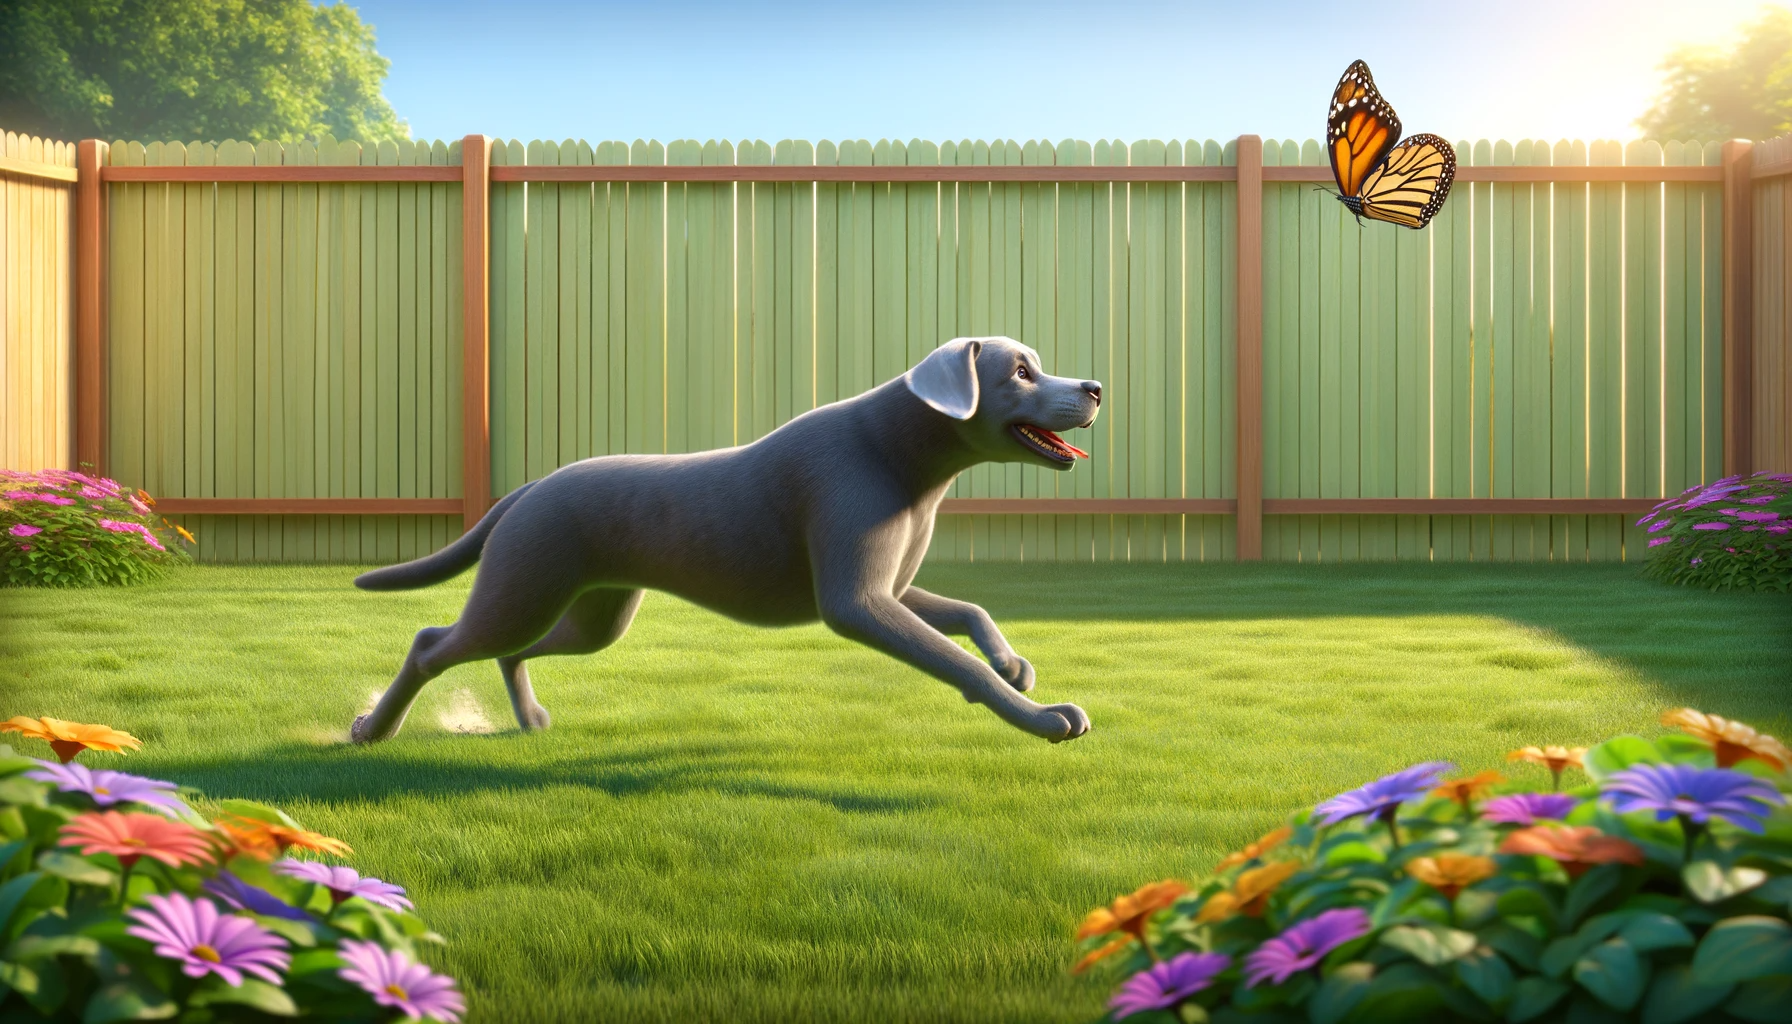 Greyador chasing a butterfly in a fenced yard